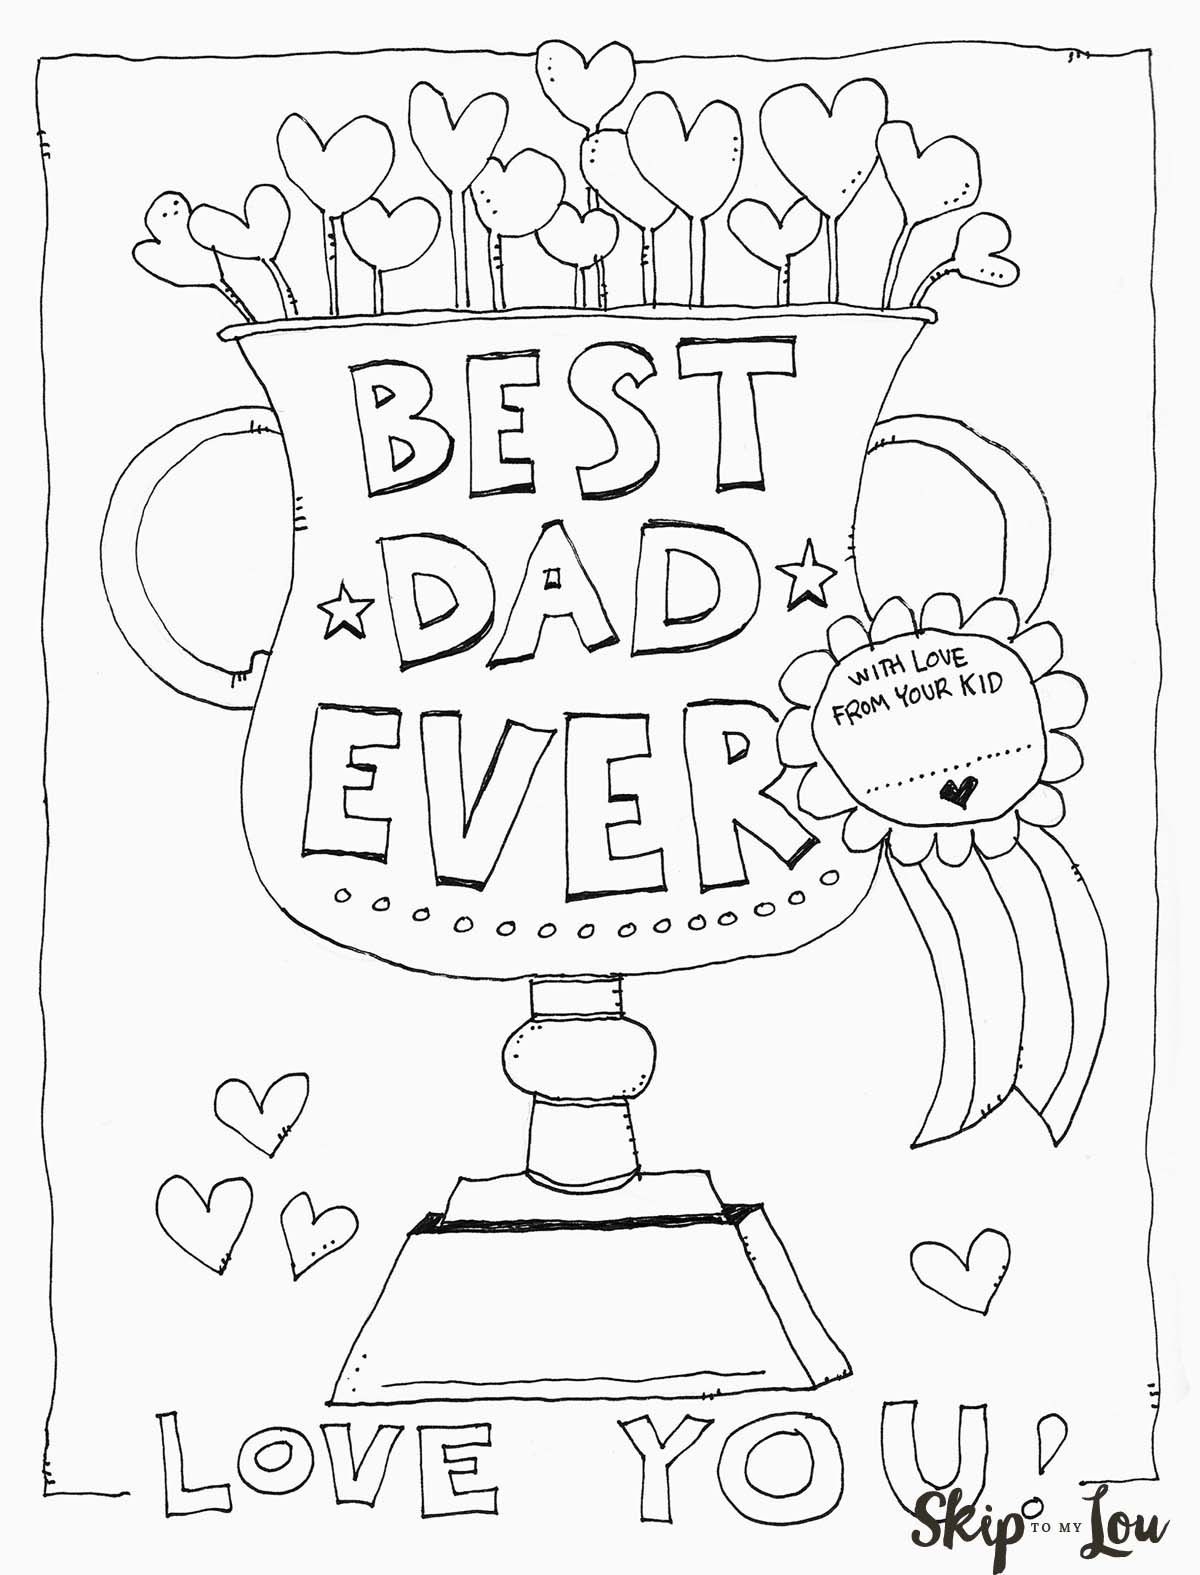 Free Printable Fathers Day Cards For Preschoolers Free Printable